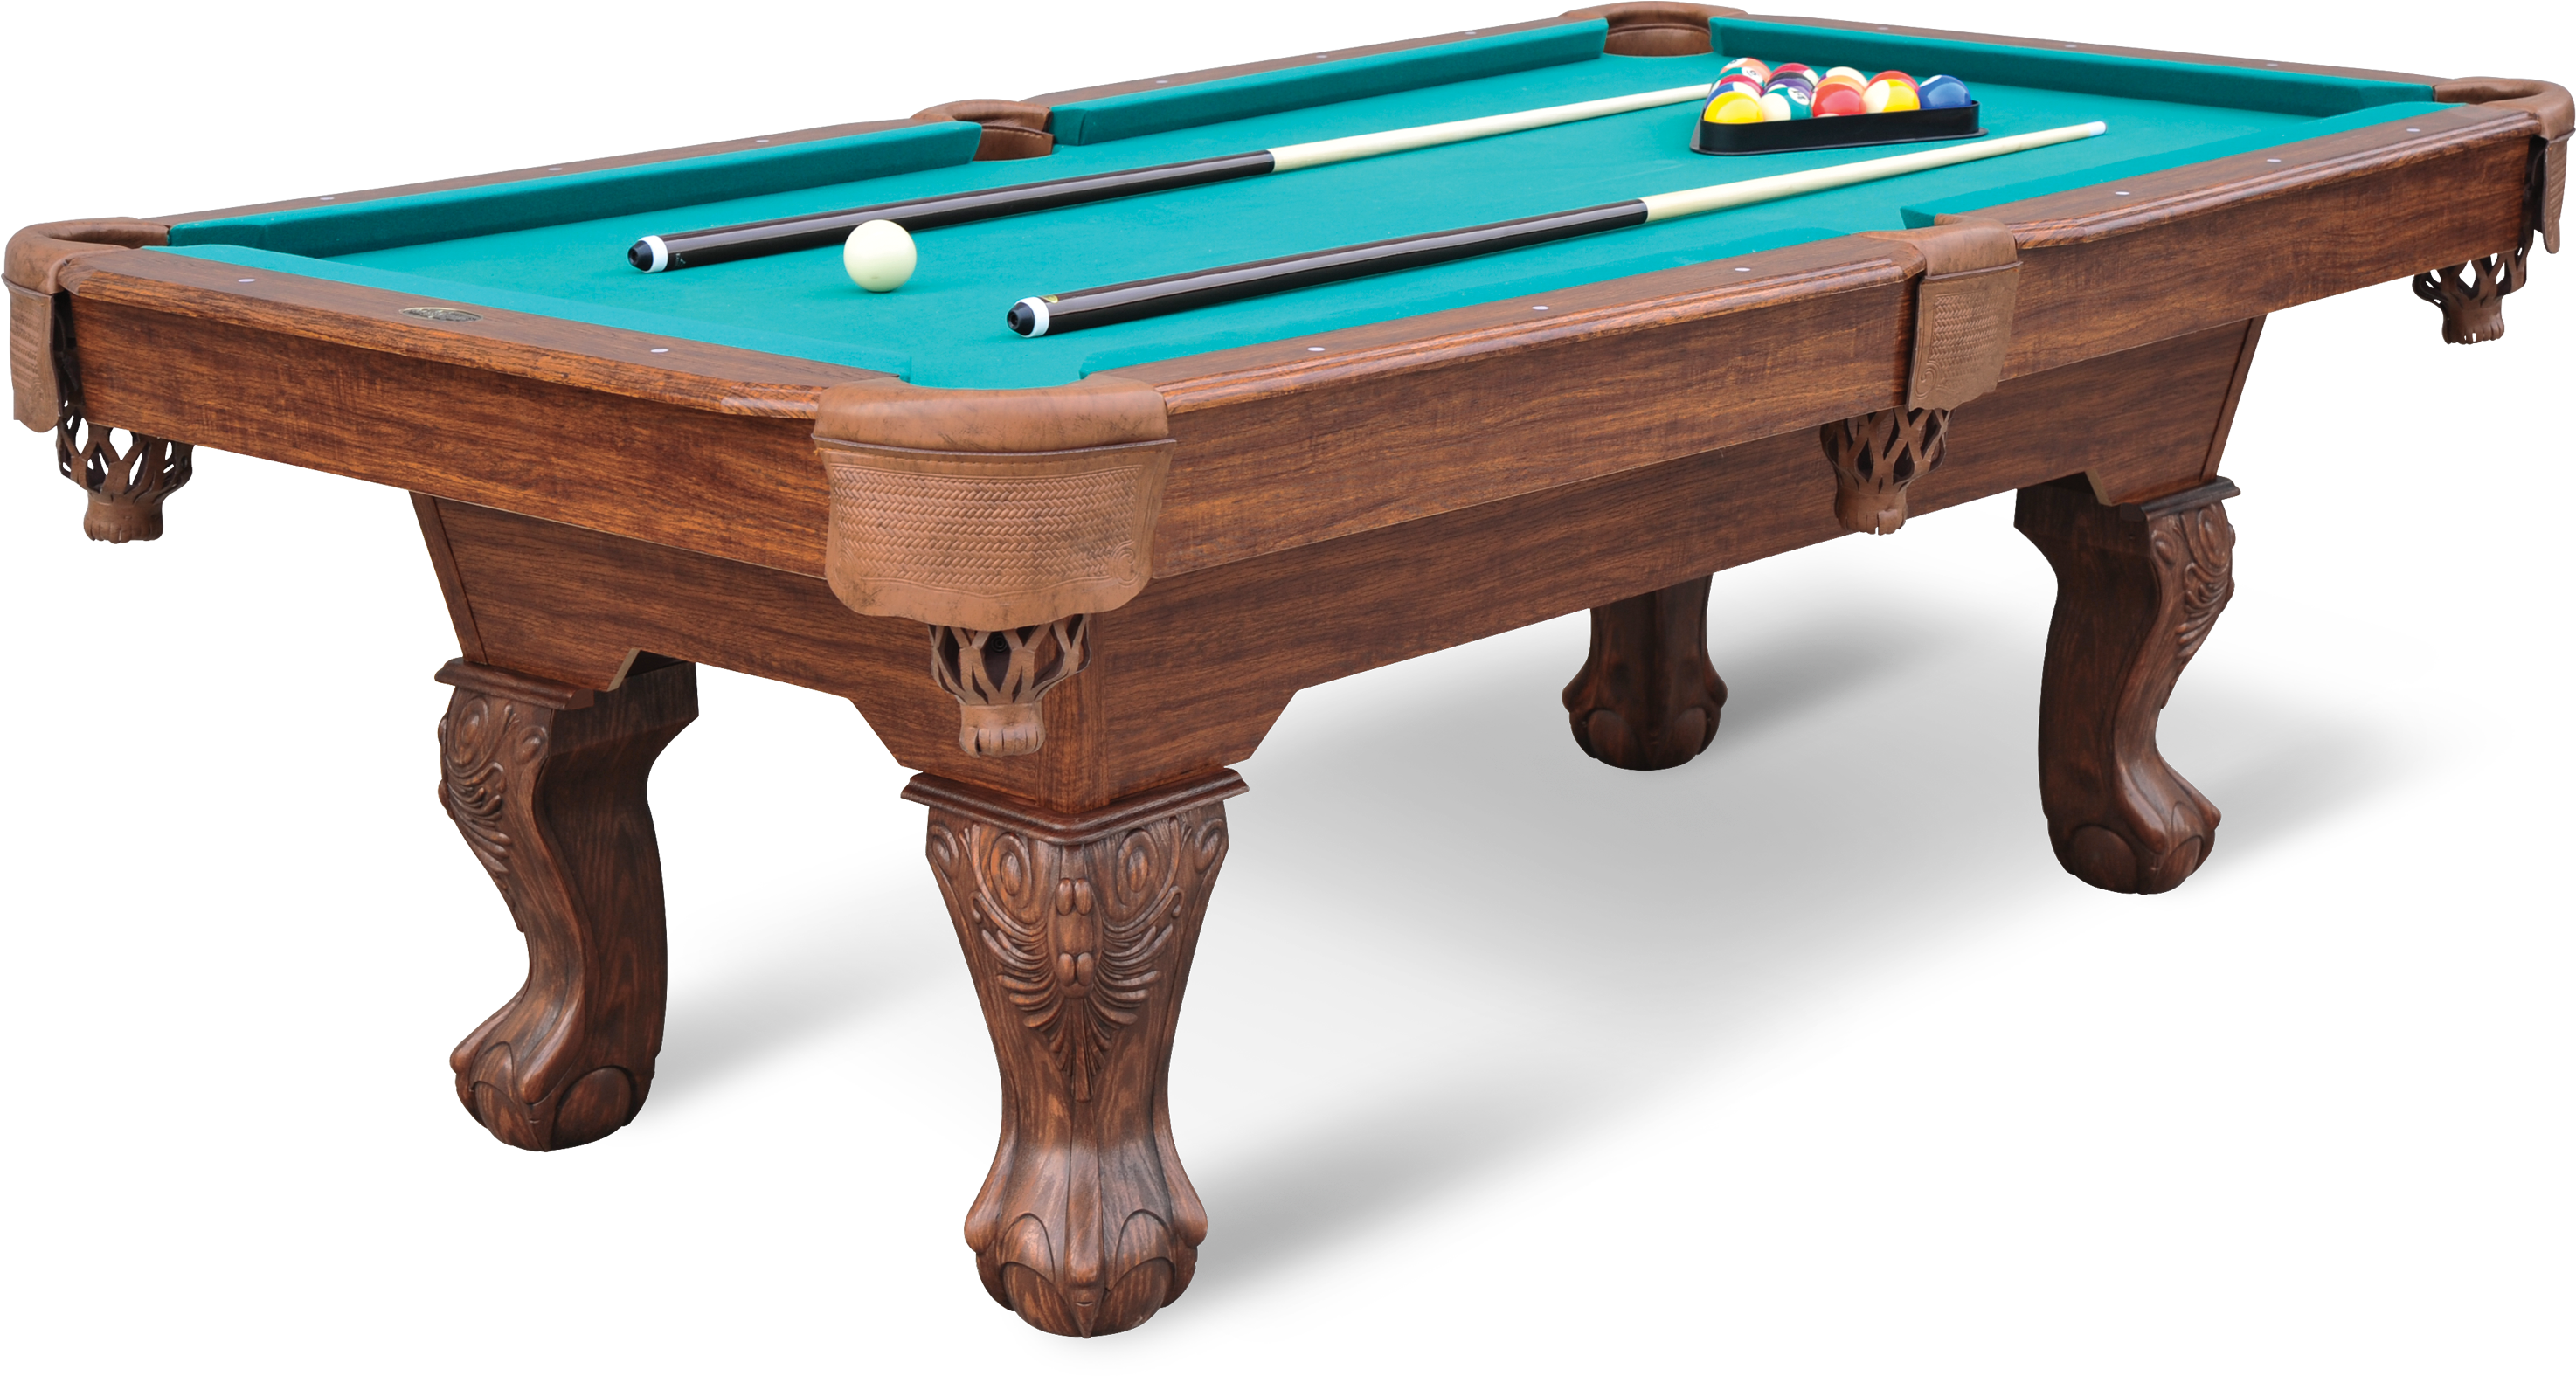 90 In Westford Billiard Table With Cue Rack And Dartboard - Pool Table, Hd Png Download